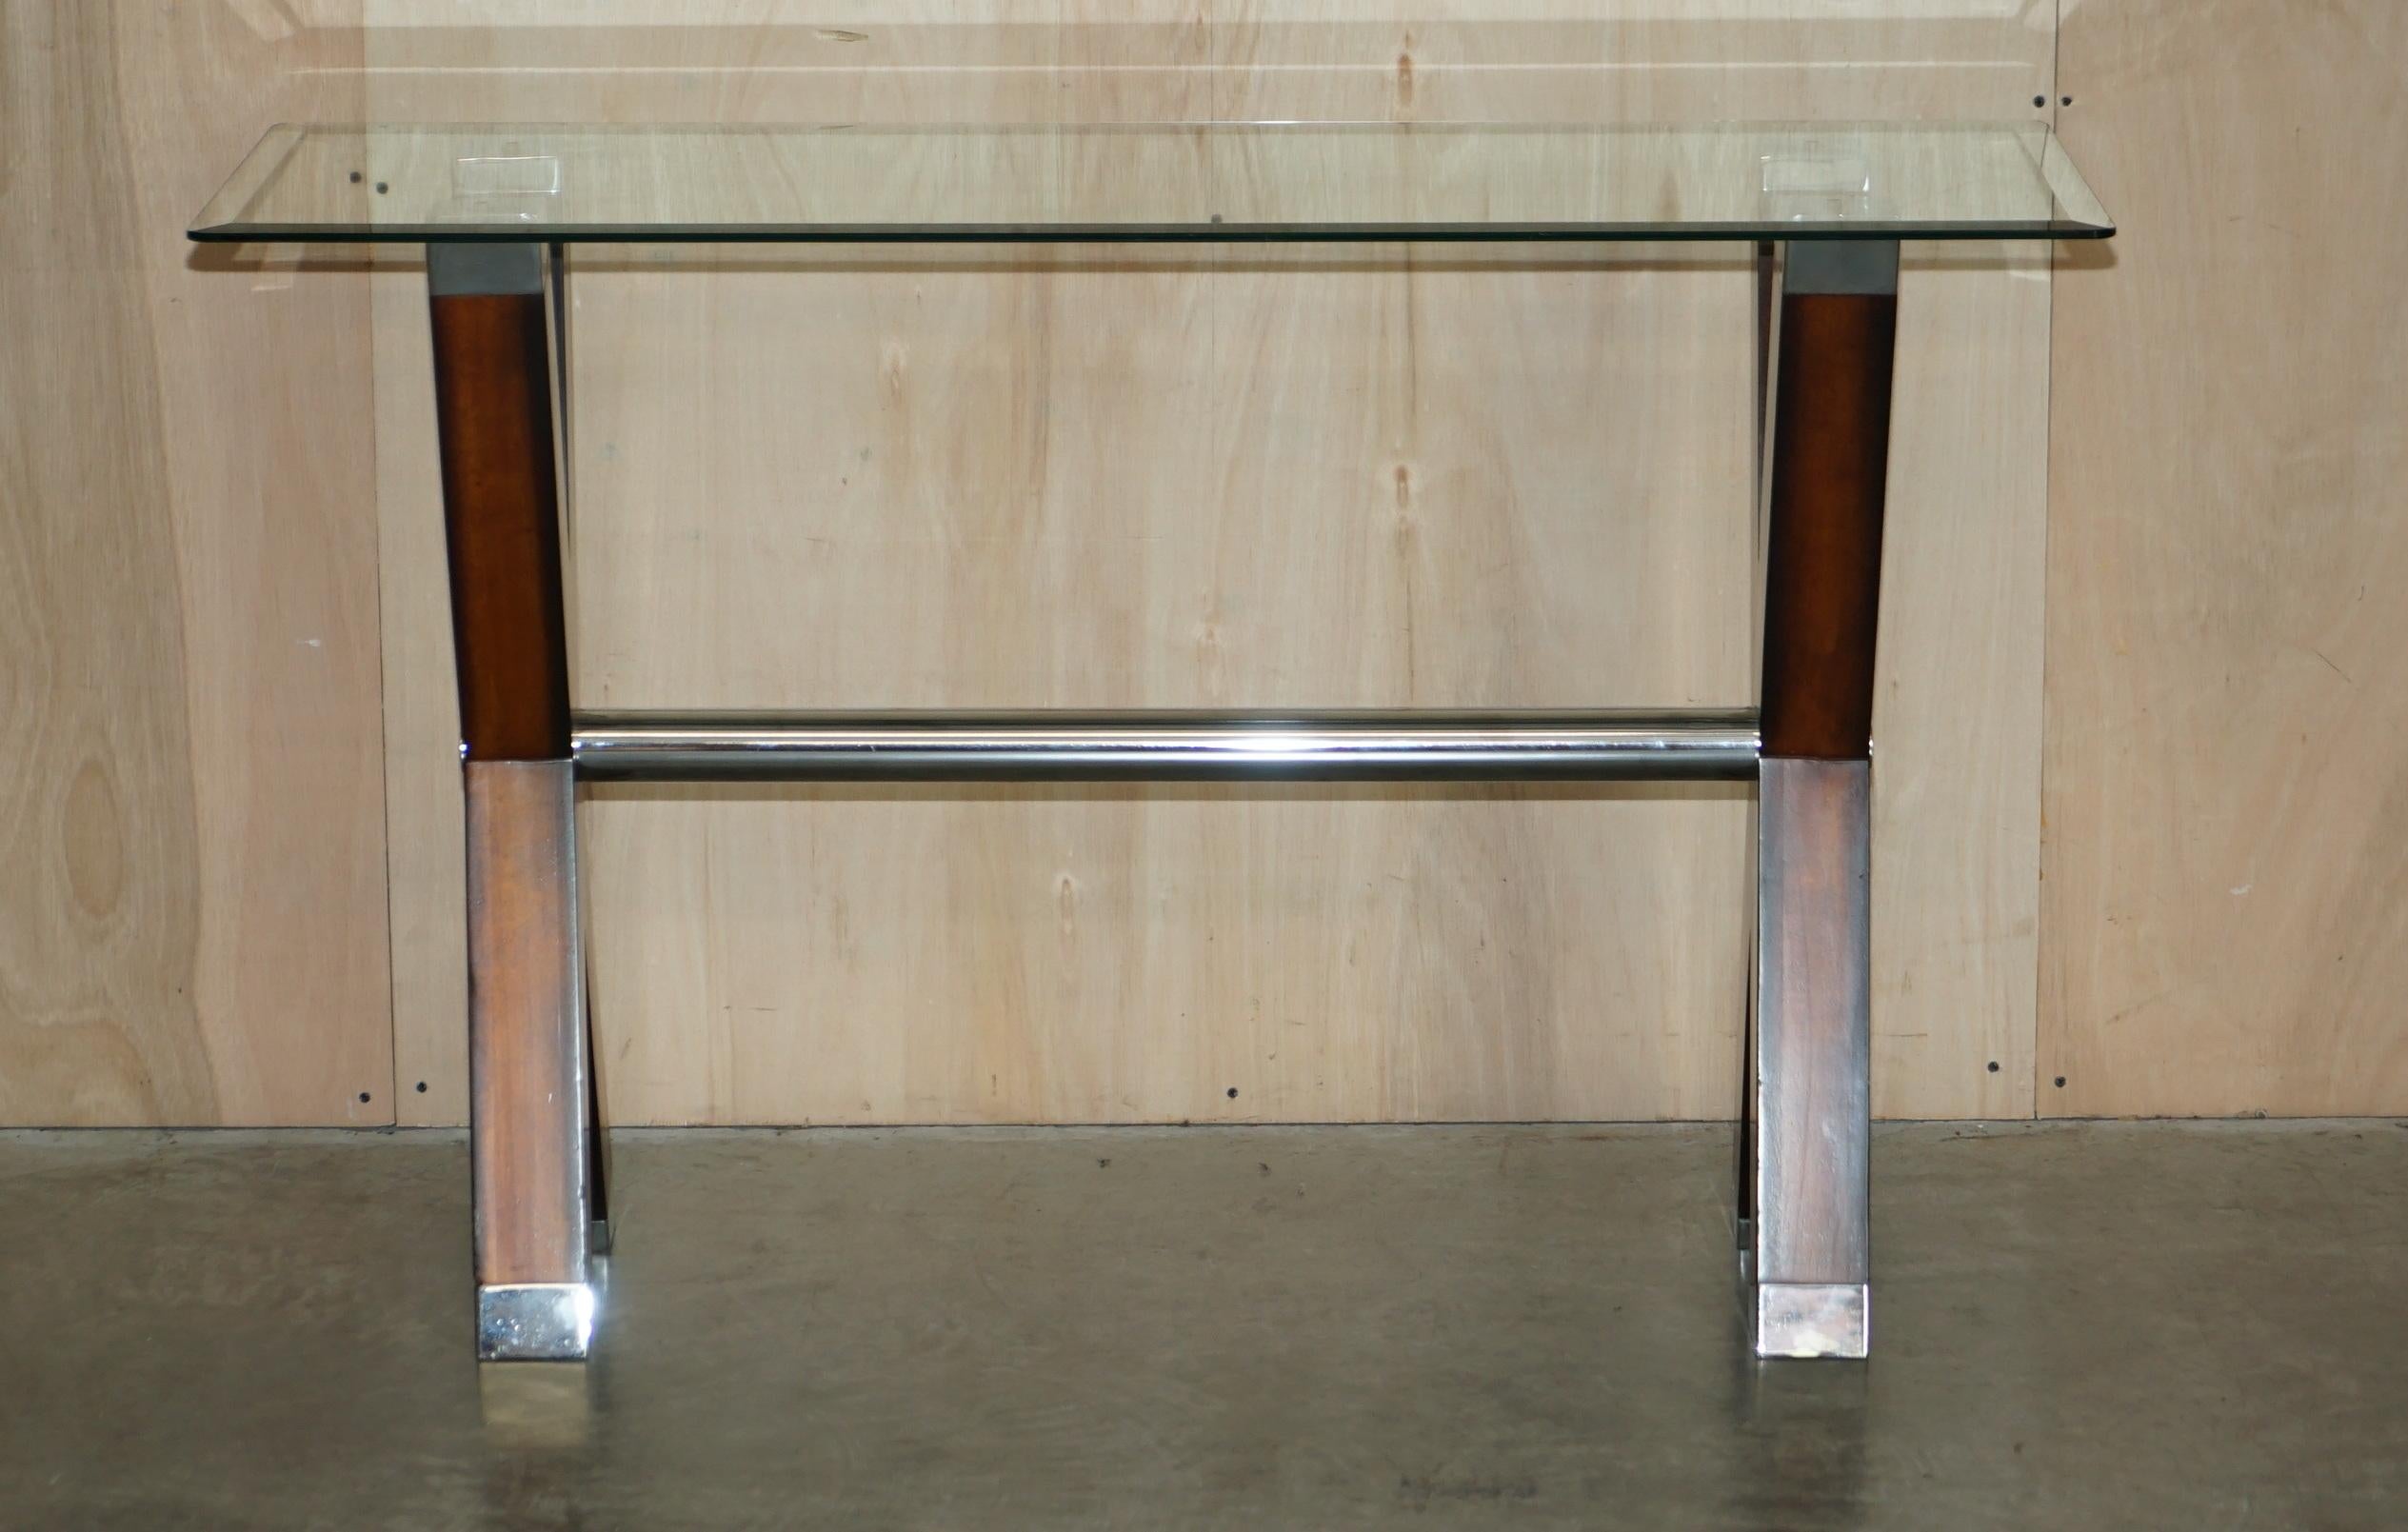 We are delighted to offer for sale this lovely, chrome tipped, x framed console table with bevelled edge glass top

A very good looking well made and decorative console or sofa table, the piece is decorated with chrome accents and looks amazing,